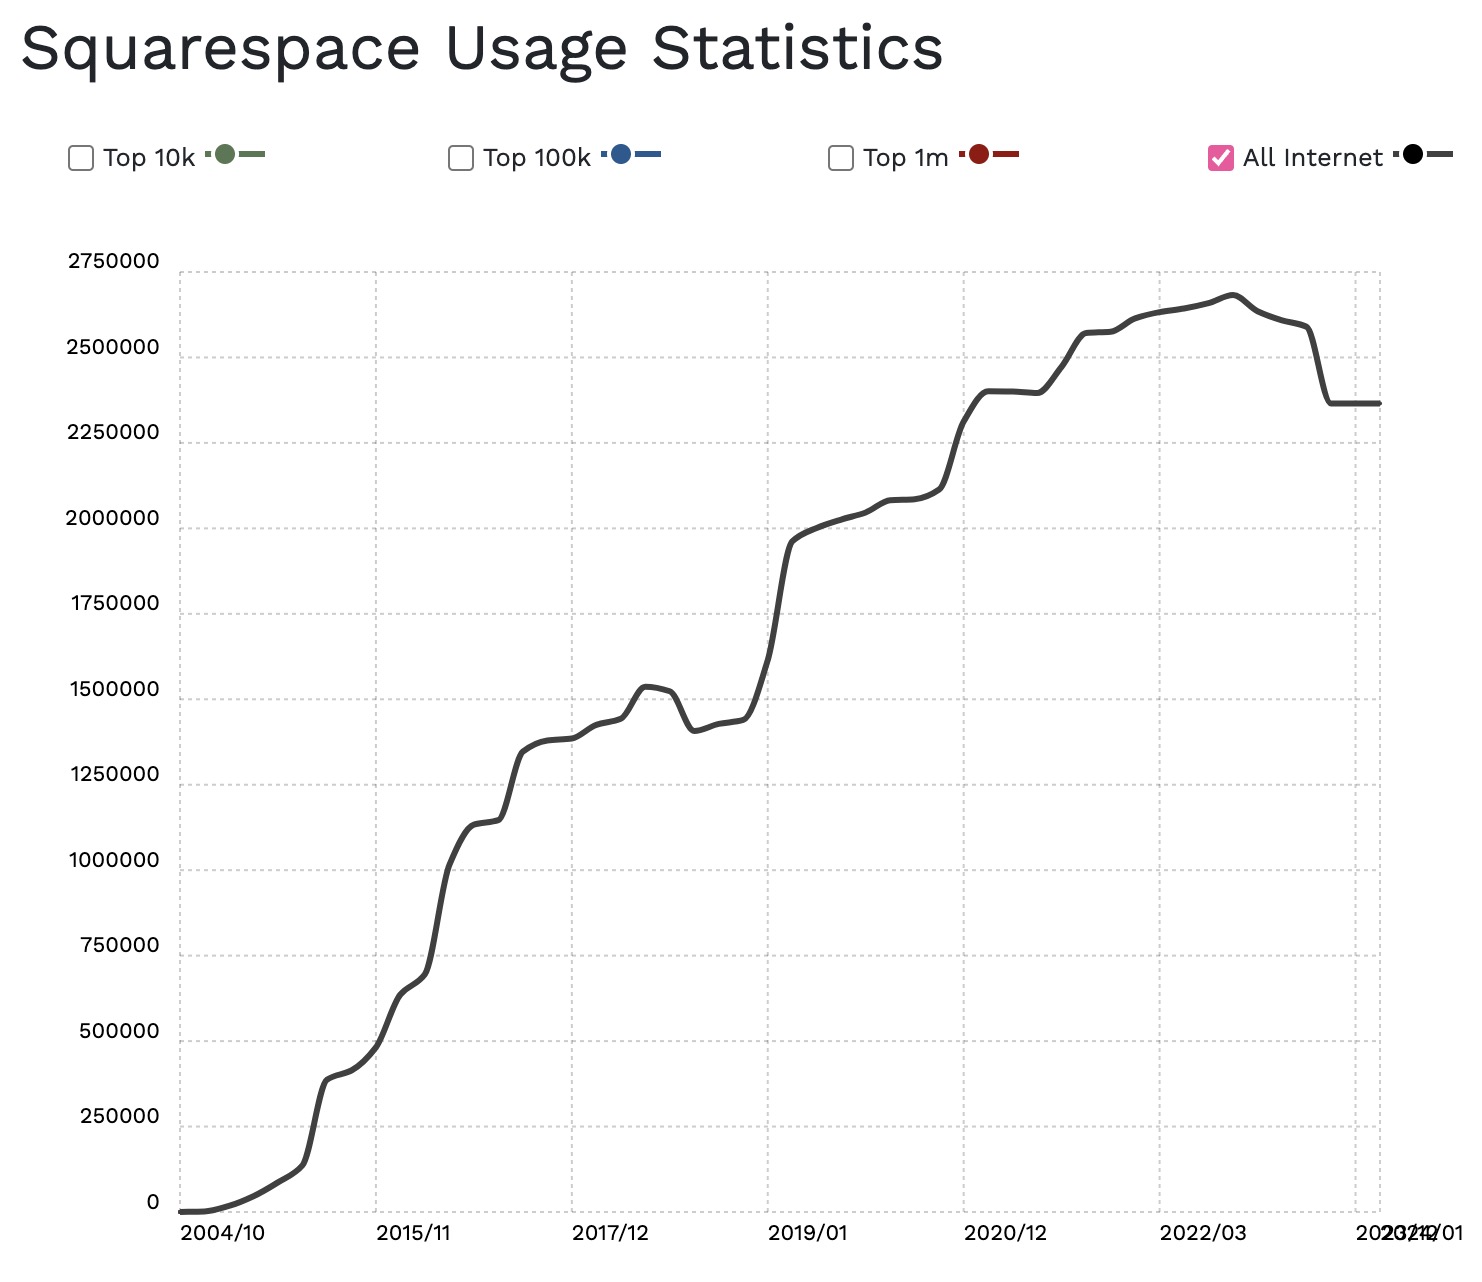 A line graph showing Squarespace usage has gone mostly up over the years